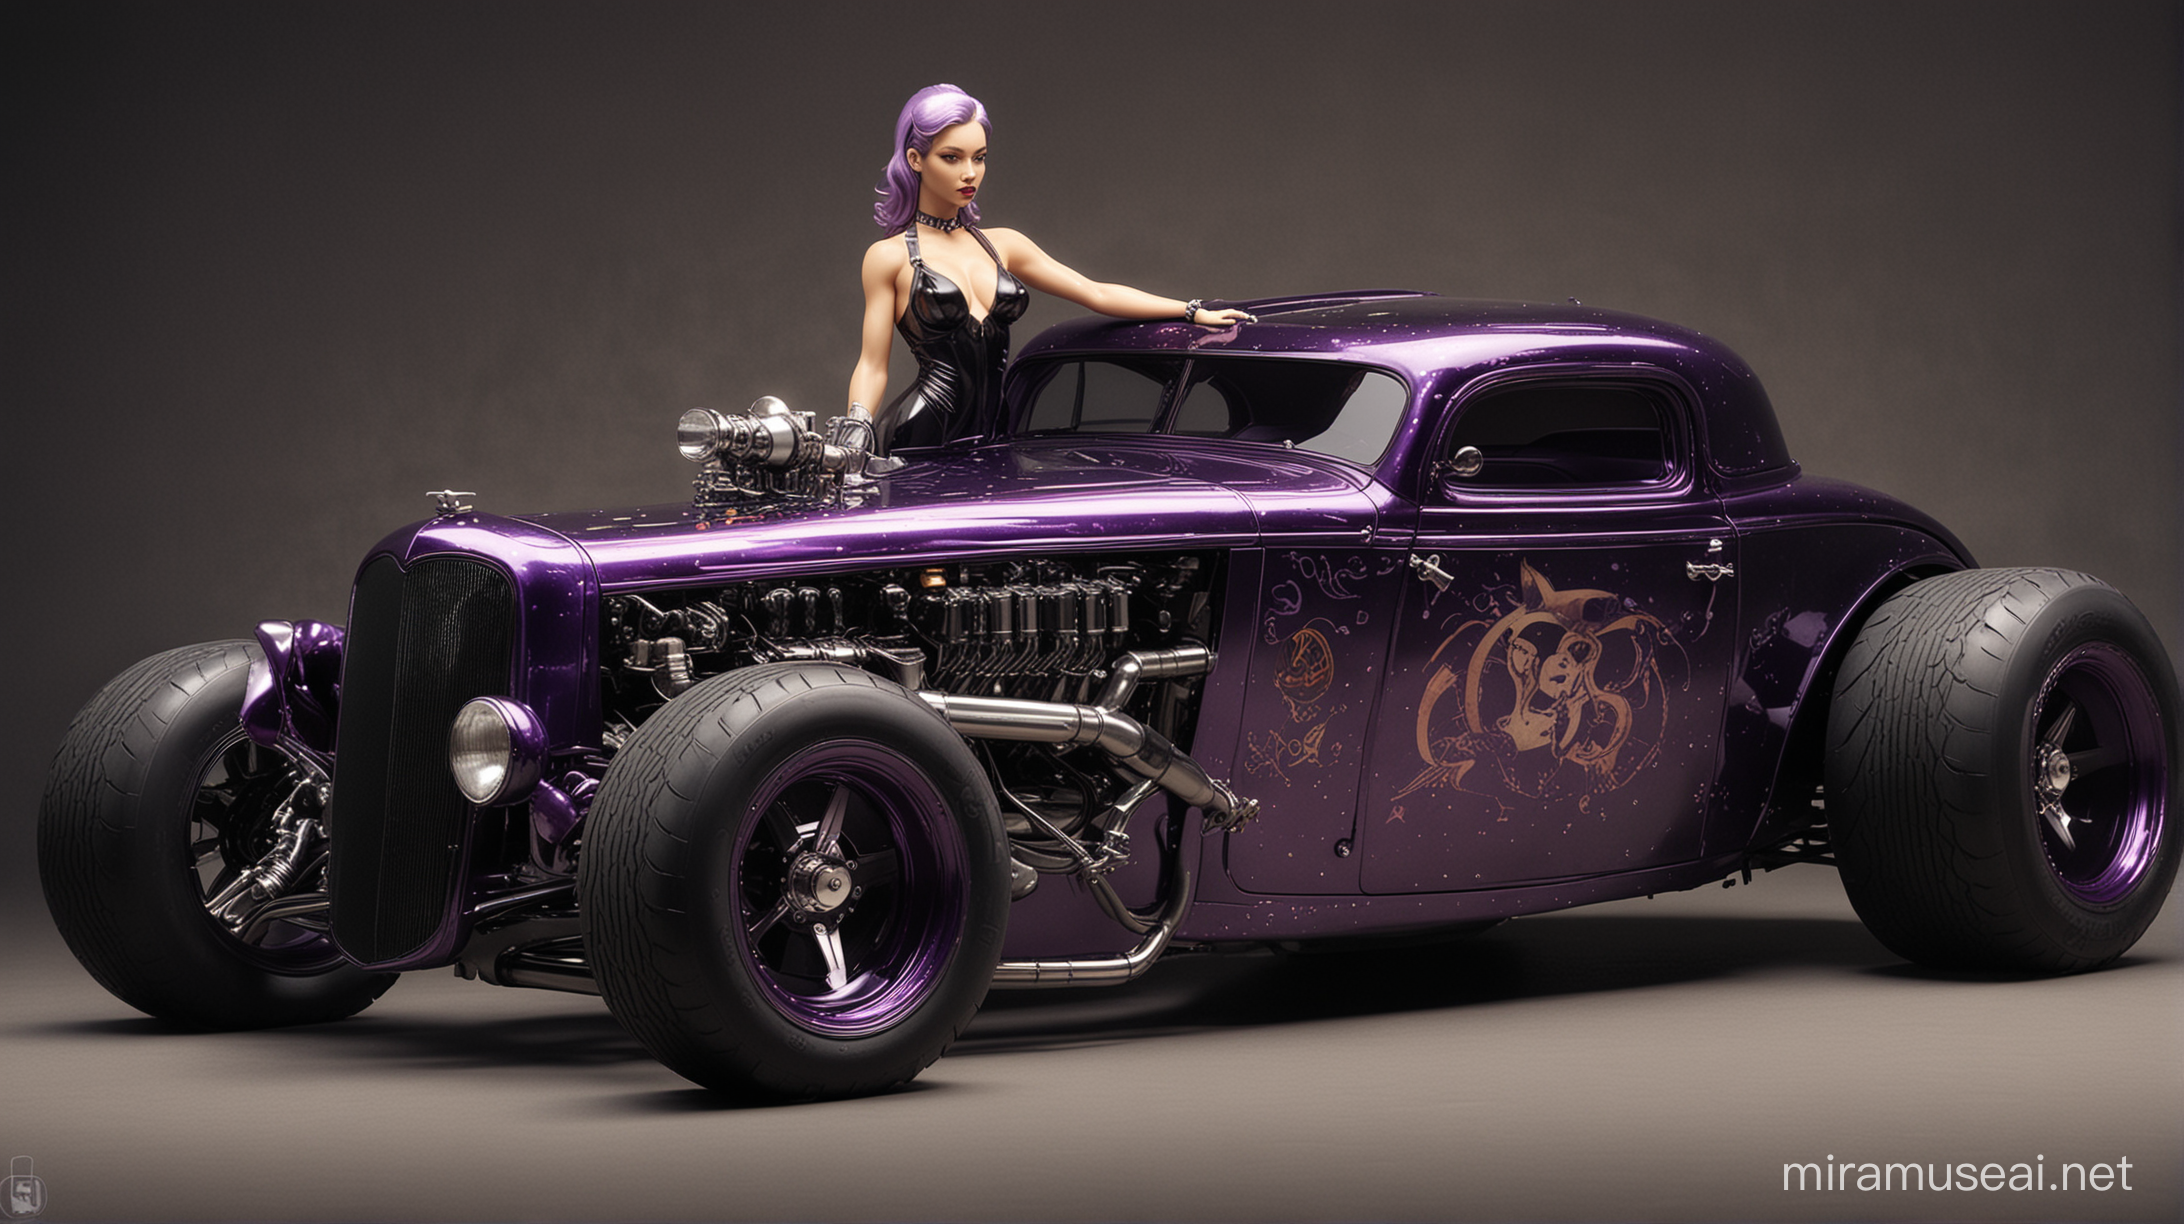  On a beautiful custom Rat - Rod 1935. 3 - window coupe, with black - purple pearl paint, with fat rear slicks. Far away towards the viewer,  stands a super - future, sensual brutal hybrid - mechanical love porcelain, doll. She beauty exquisite. Wearing the most beautiful silk. Art by Saturno Butto.